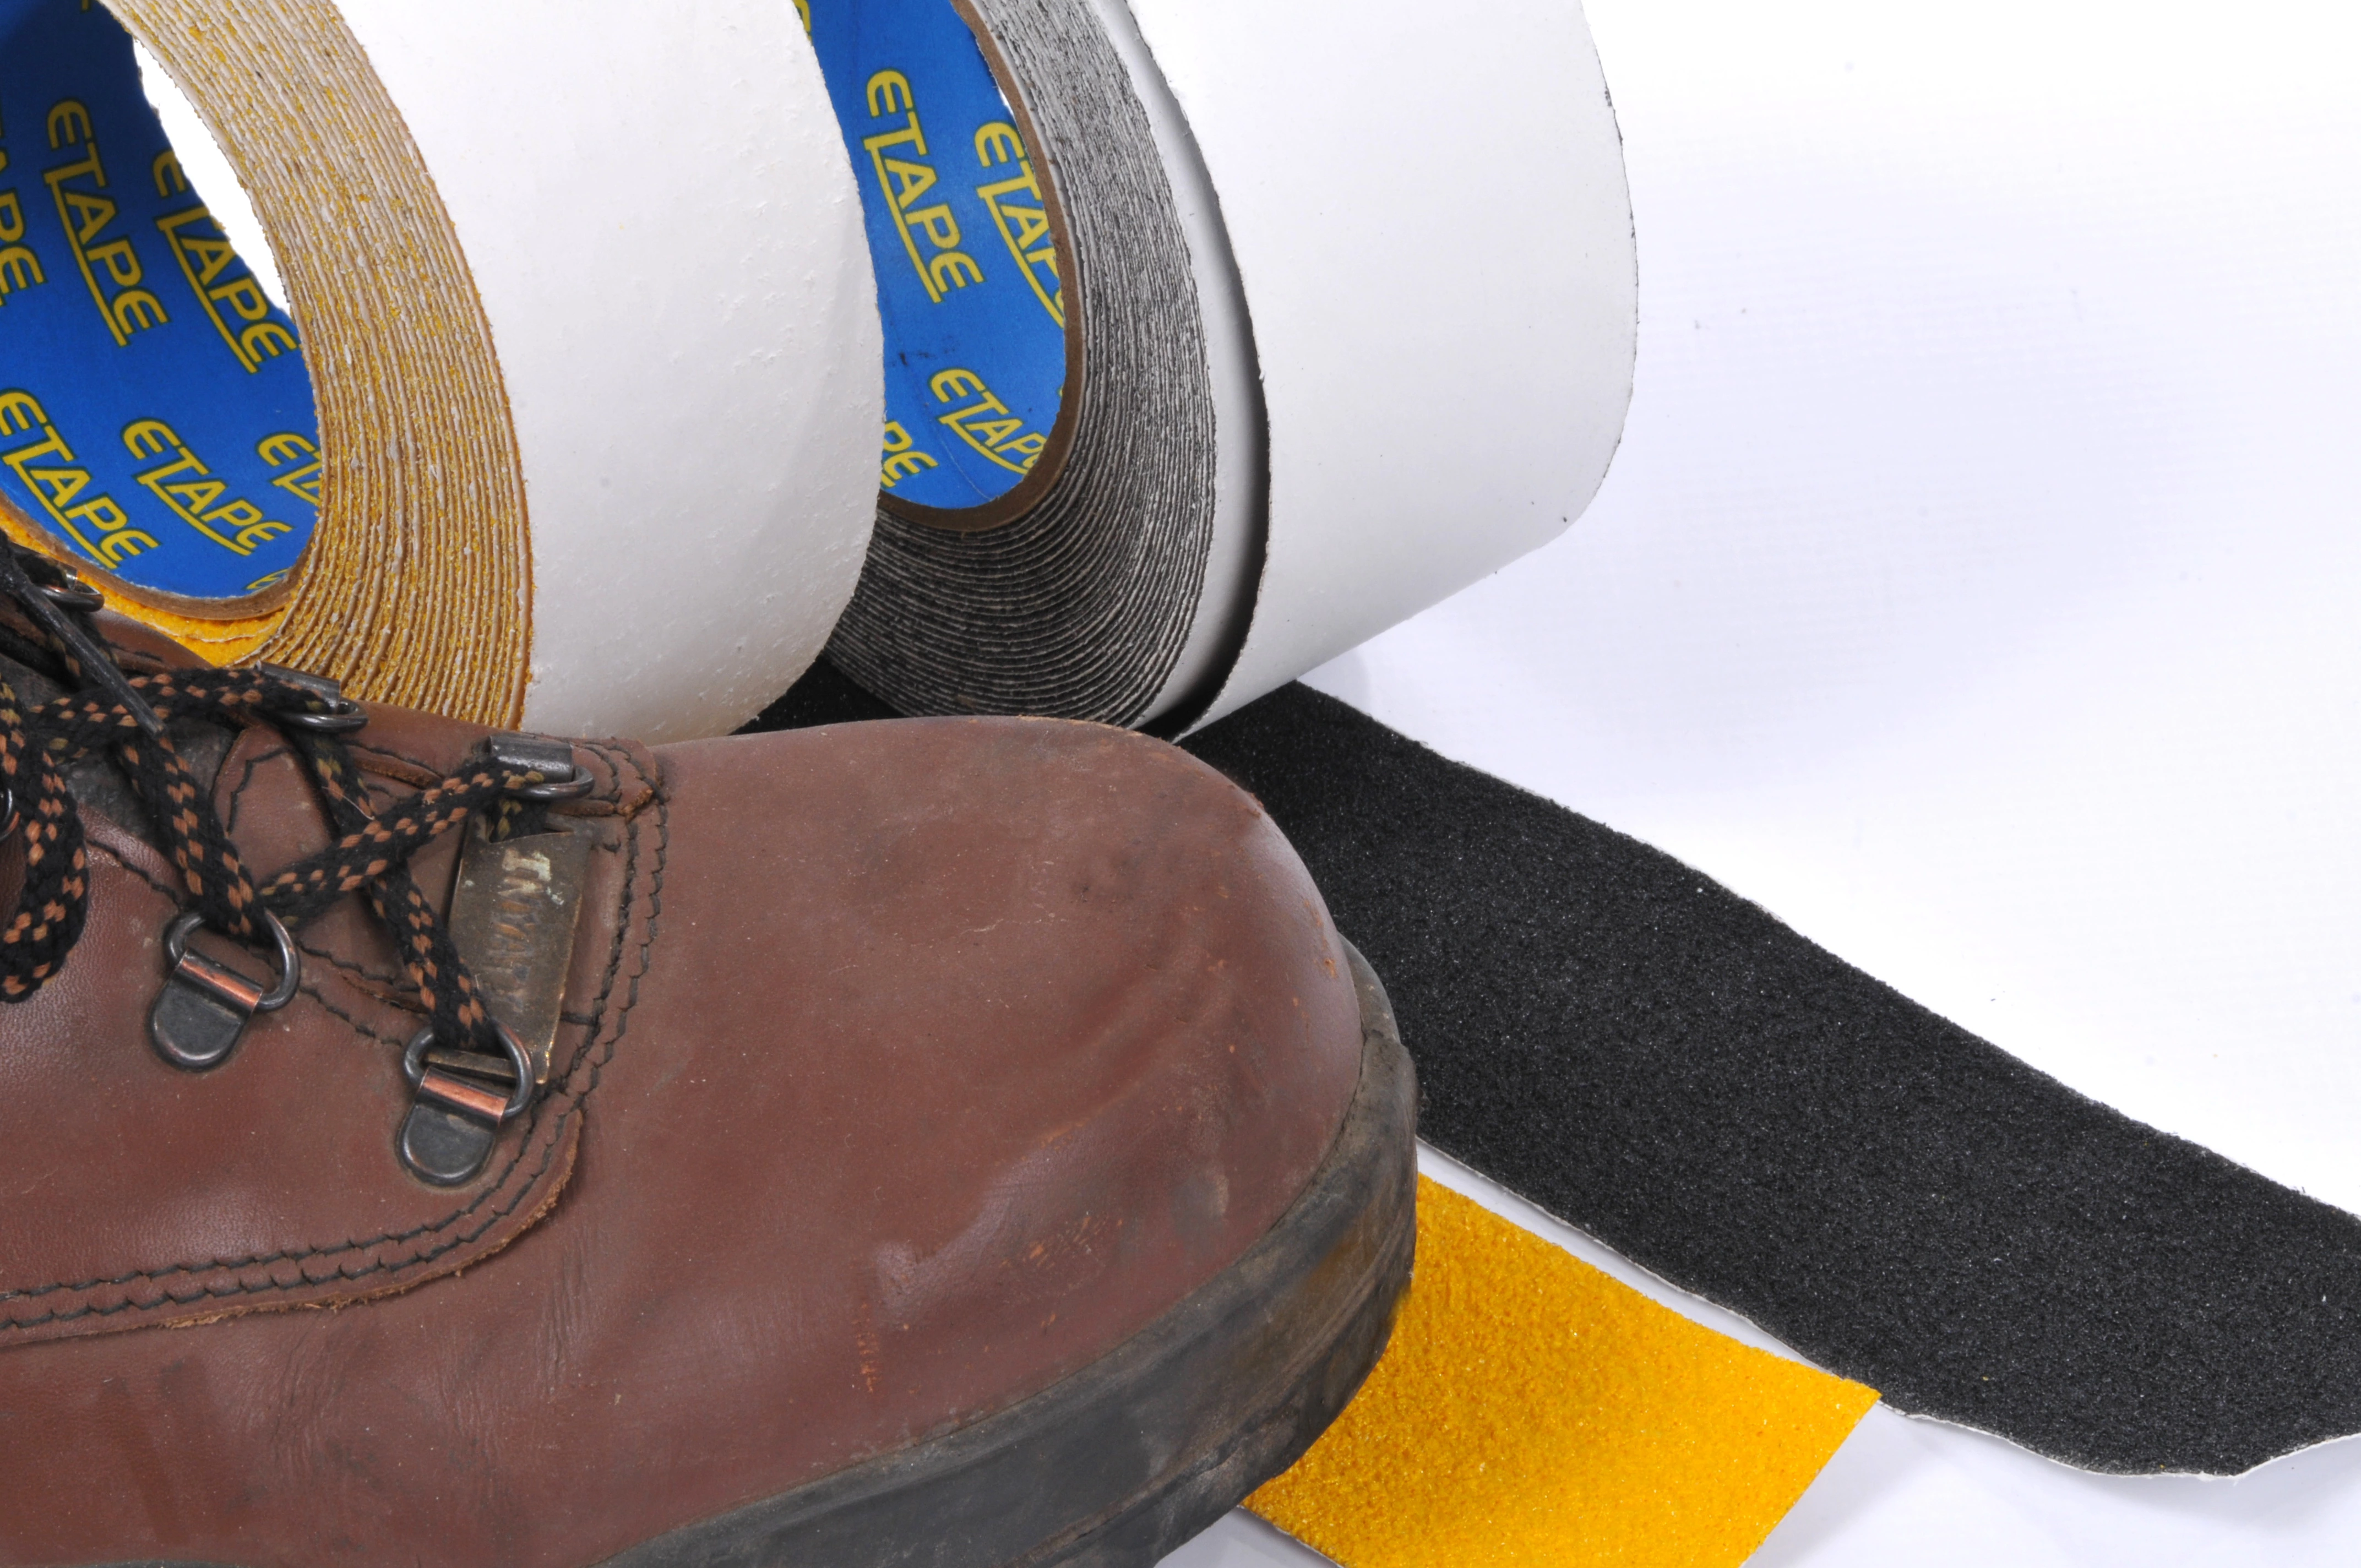 Safety walk tape used to quick resolutions of problematic slippery surfaces sold by Easitape